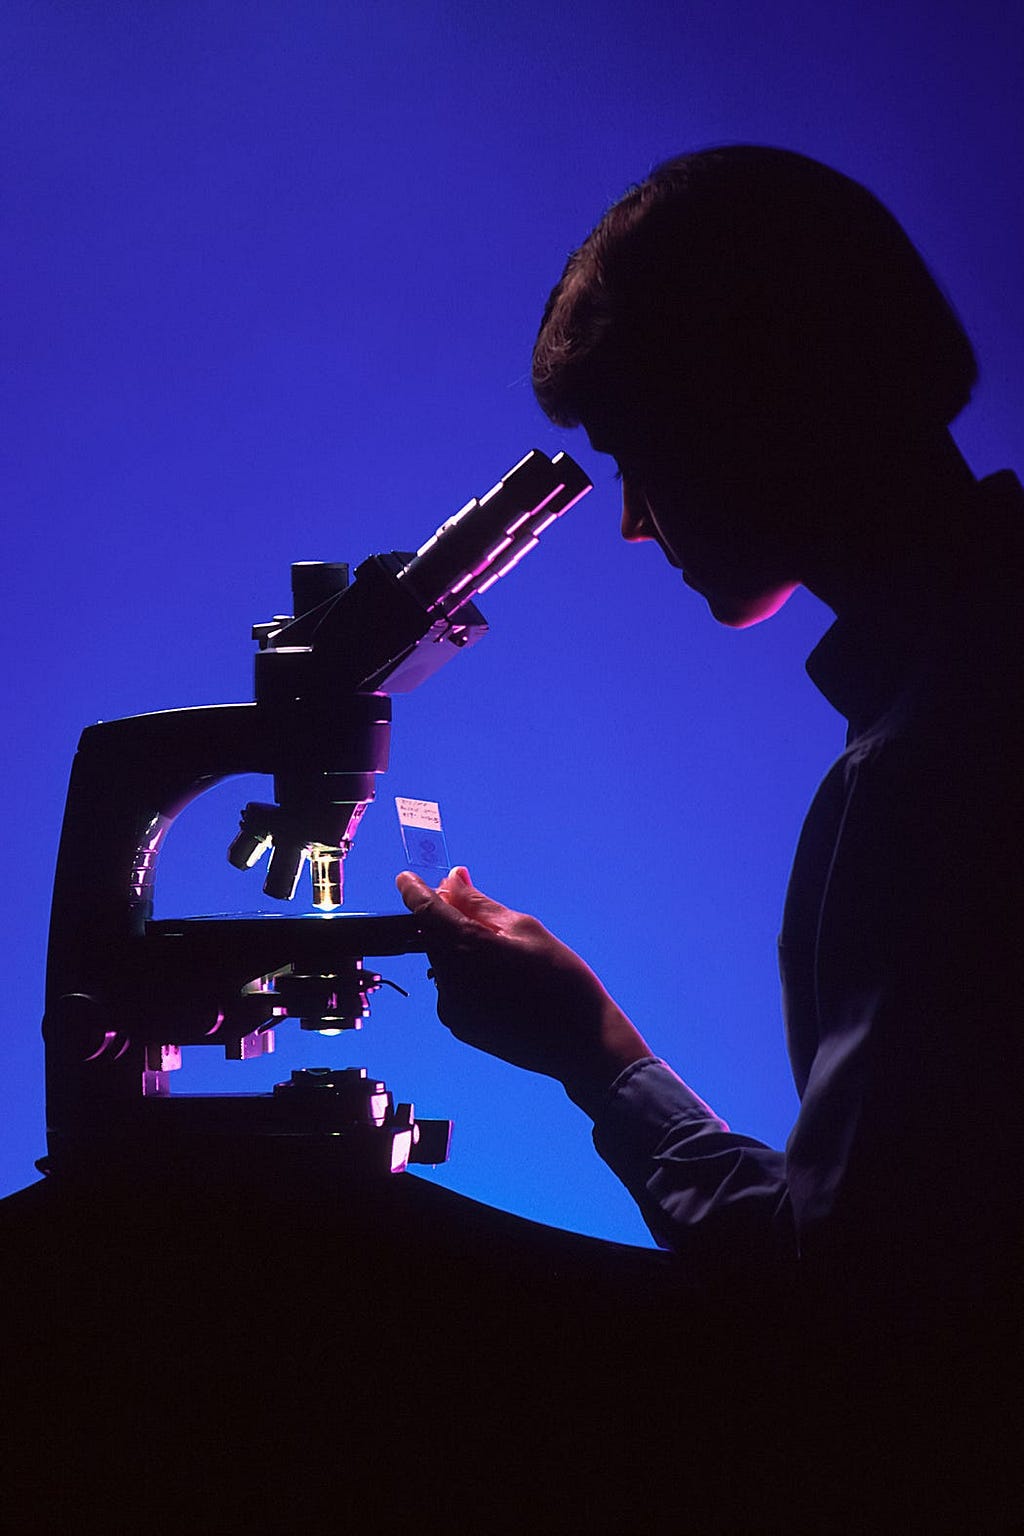 A woman (most likely a scientist) looking at a sample through the microscope